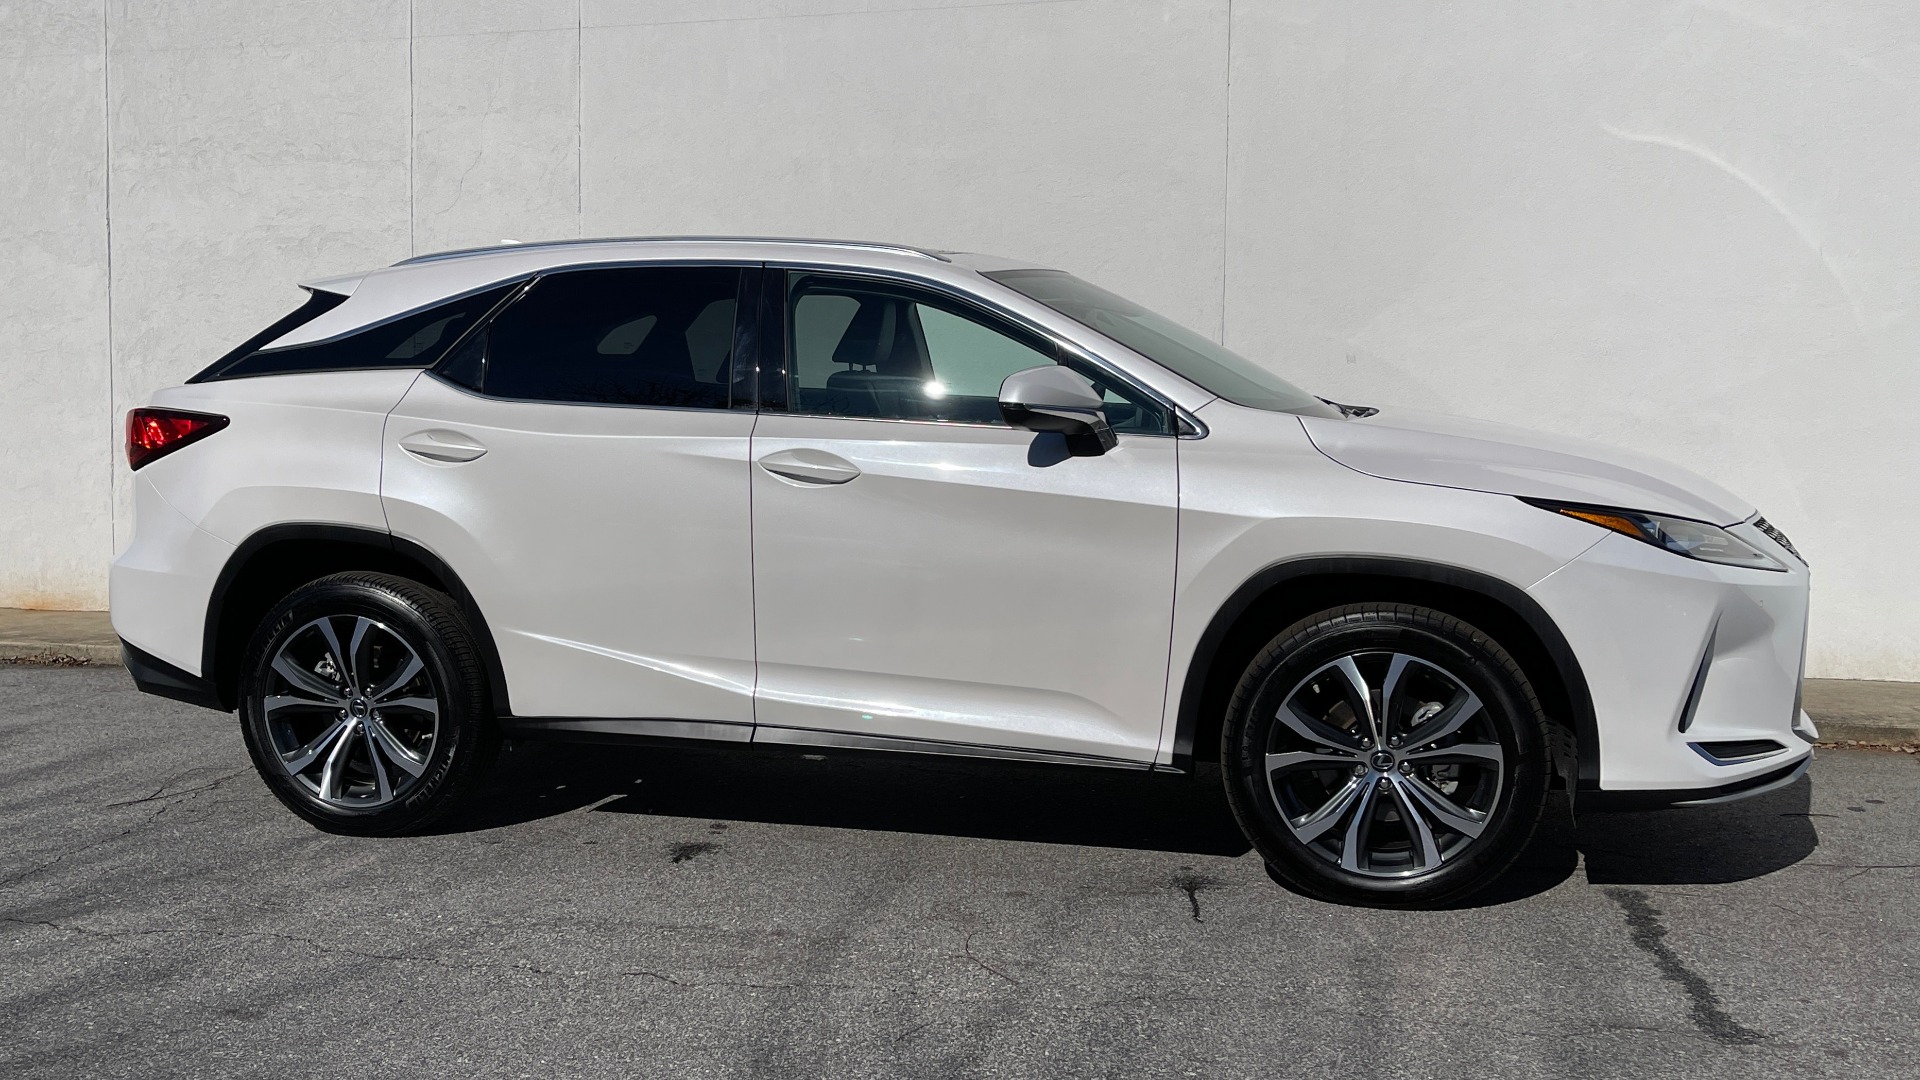 Used 2020 Lexus RX 350 PREMIUM 3.5L SUV / SUNROOF / TOW PREP / VENT STS / REARVIEW for sale Sold at Formula Imports in Charlotte NC 28227 6